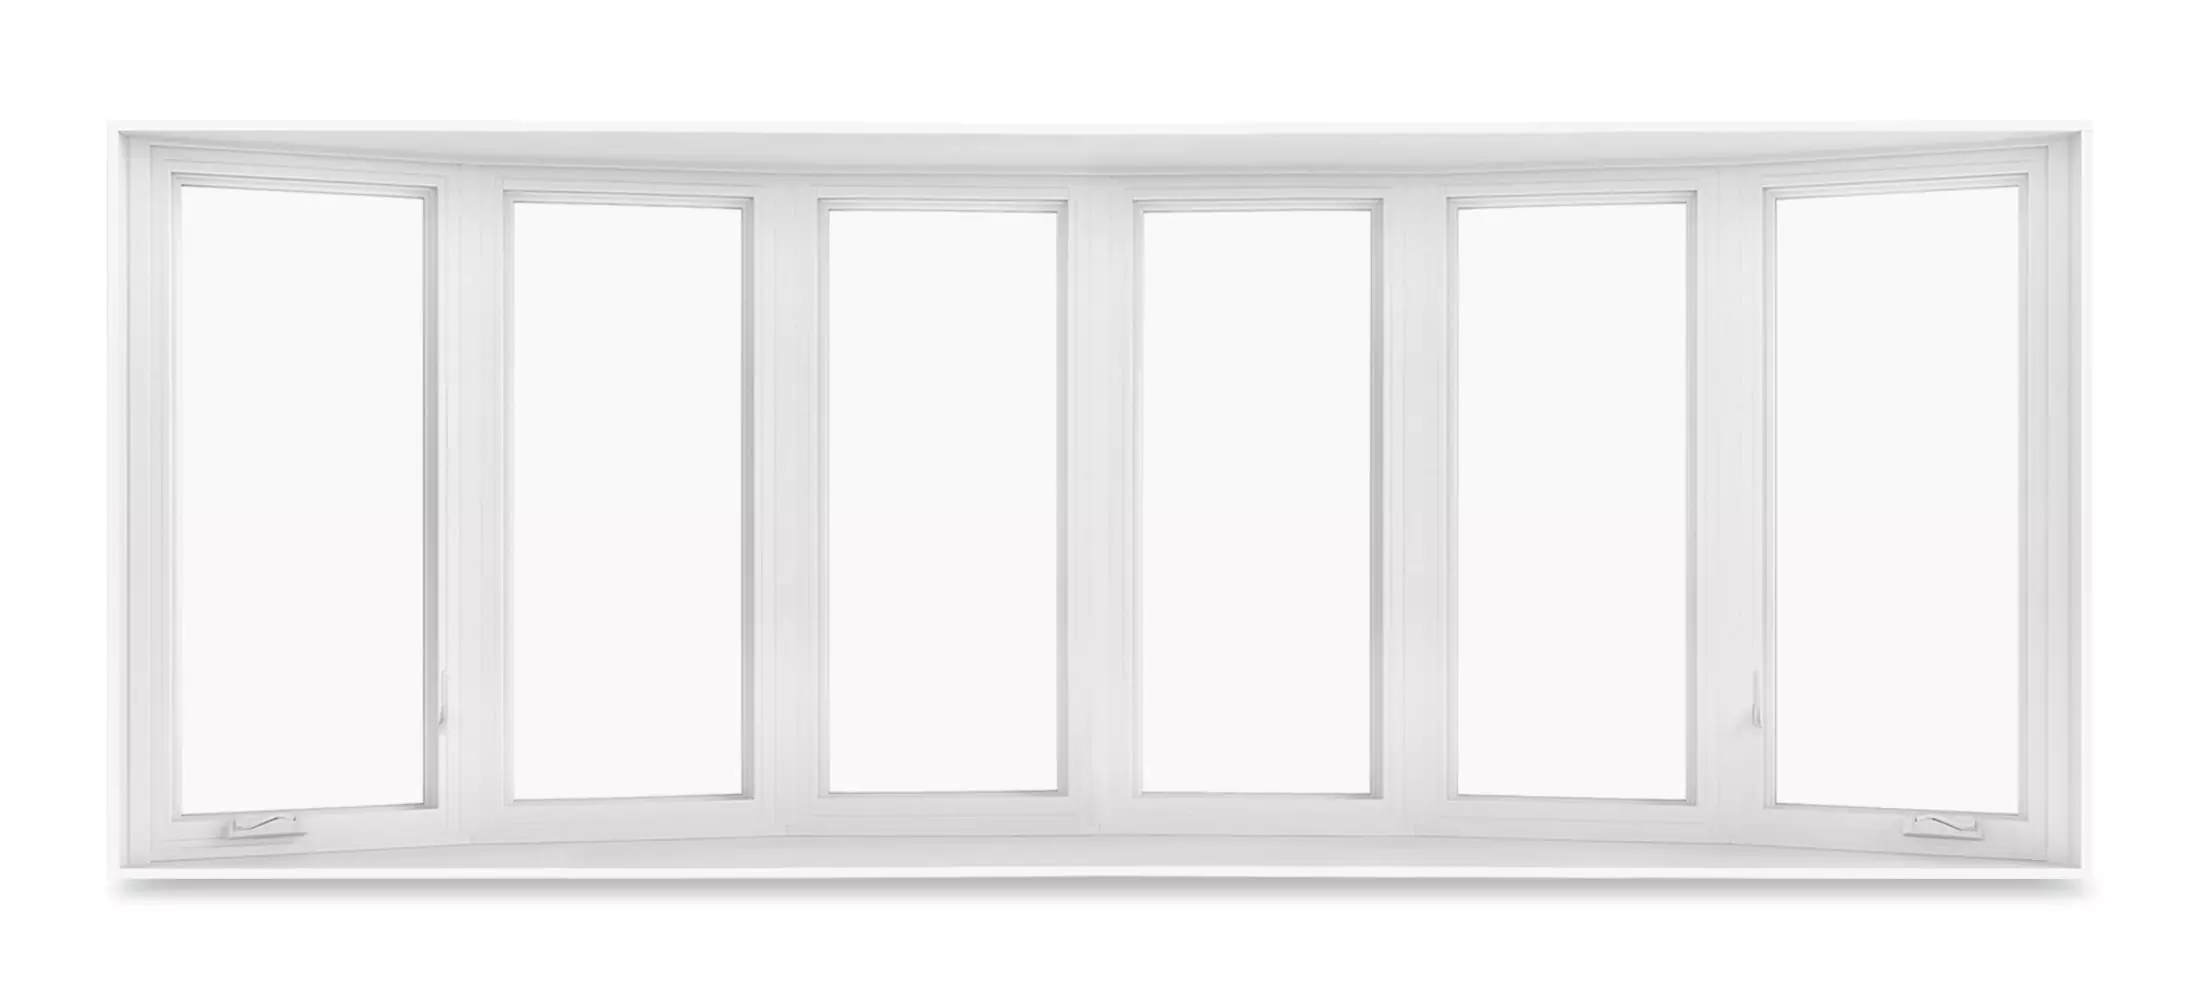 Bow window with 6-wide casements